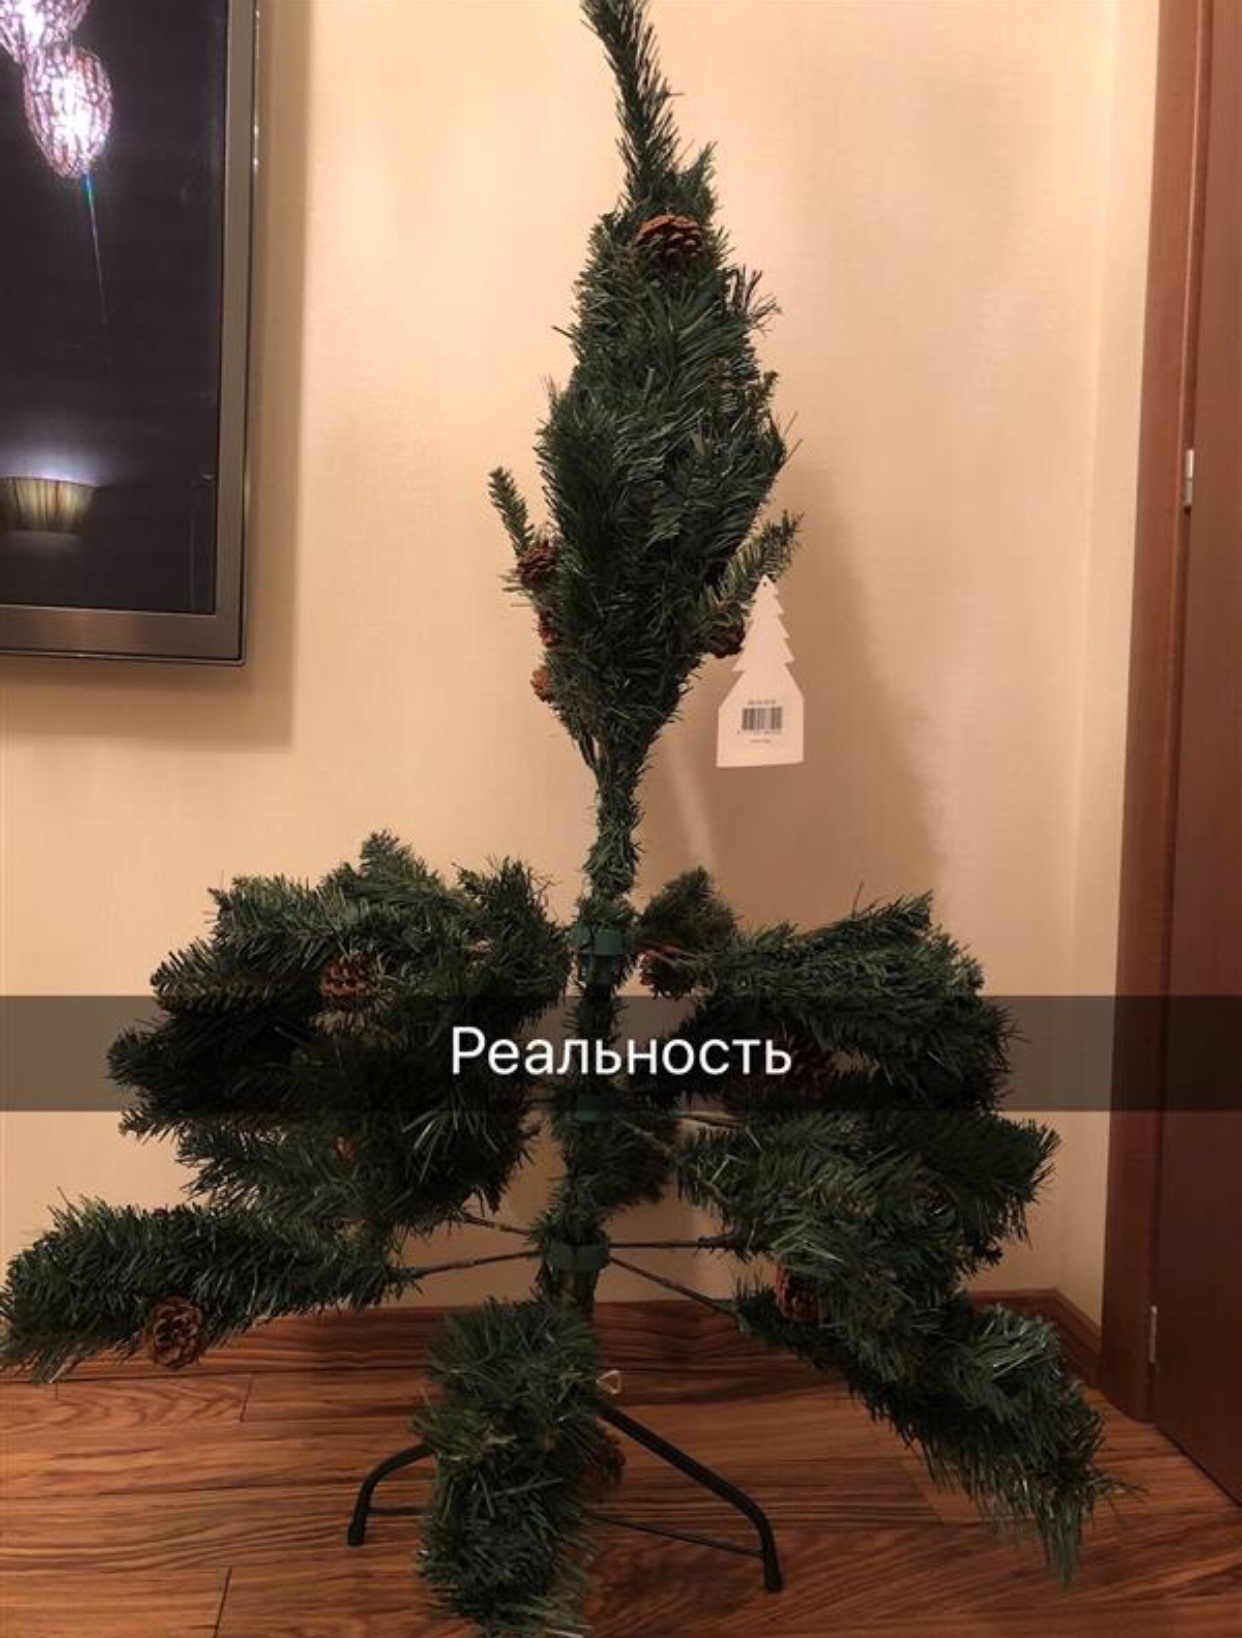 I ordered a tree here - New Year, Christmas trees, Expectation and reality, Longpost